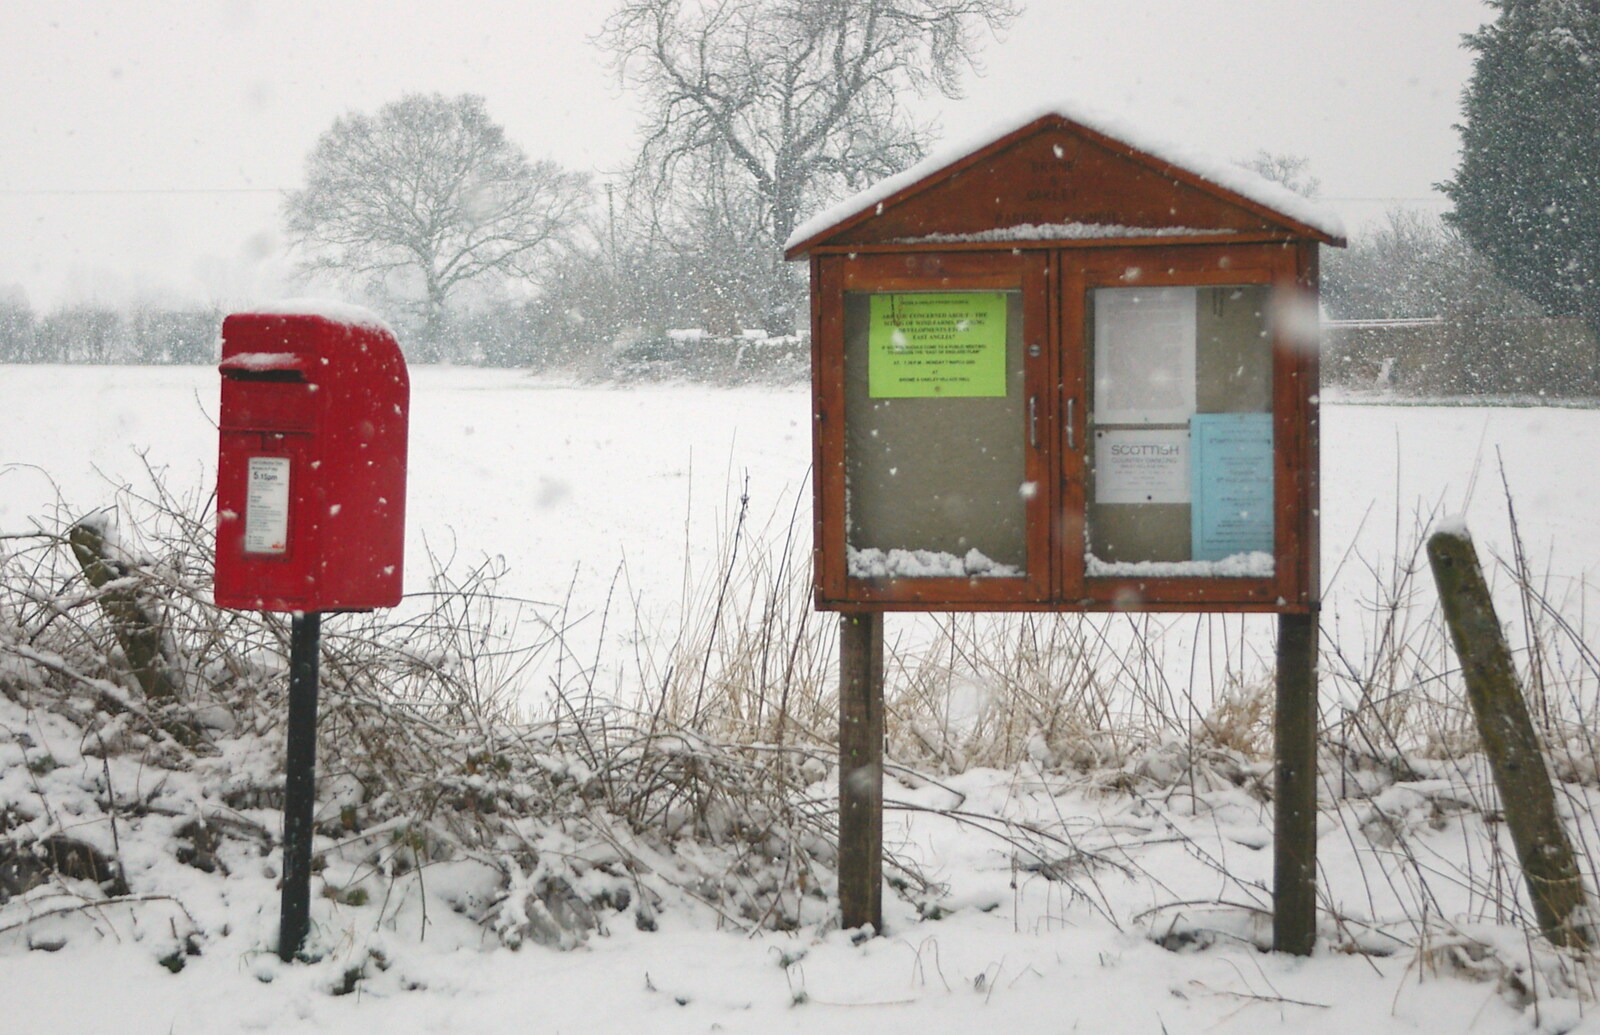 The postbox and village sign from Wendy Leaves "The Lab" and a Snow Day, Cambridge and Brome - 25th February 2005